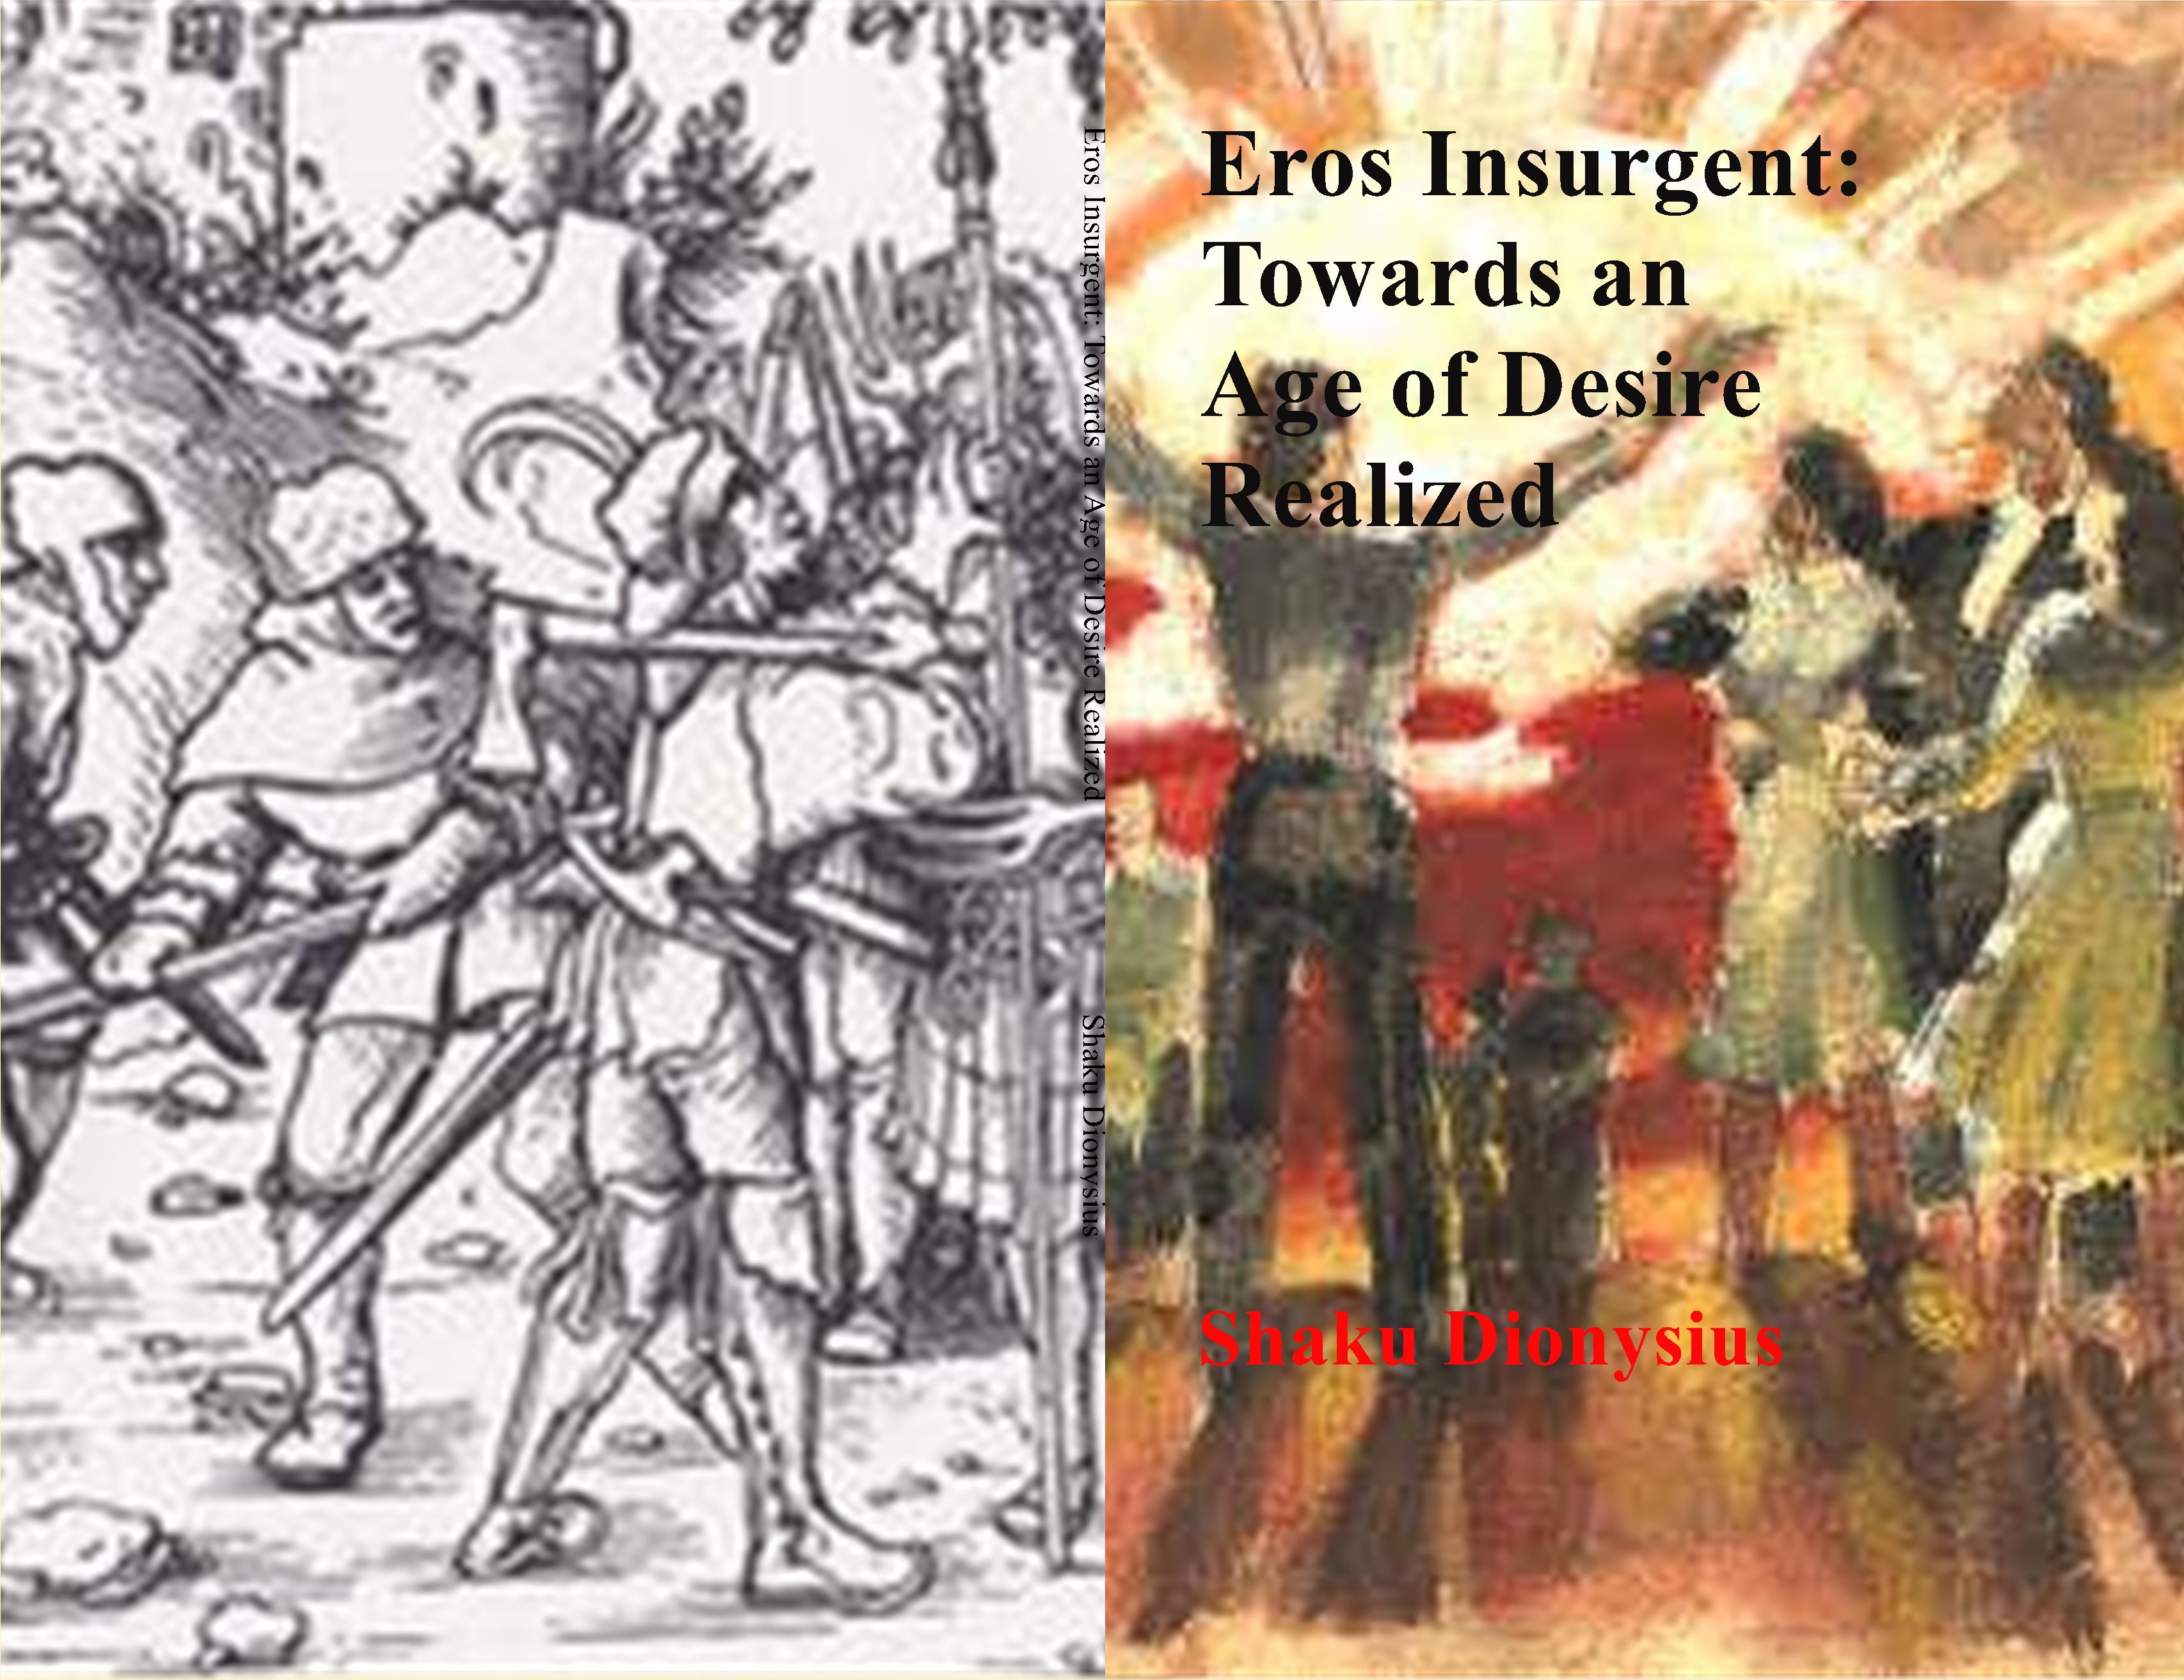 Eros Insurgent: Towards an Age of Desire cover image